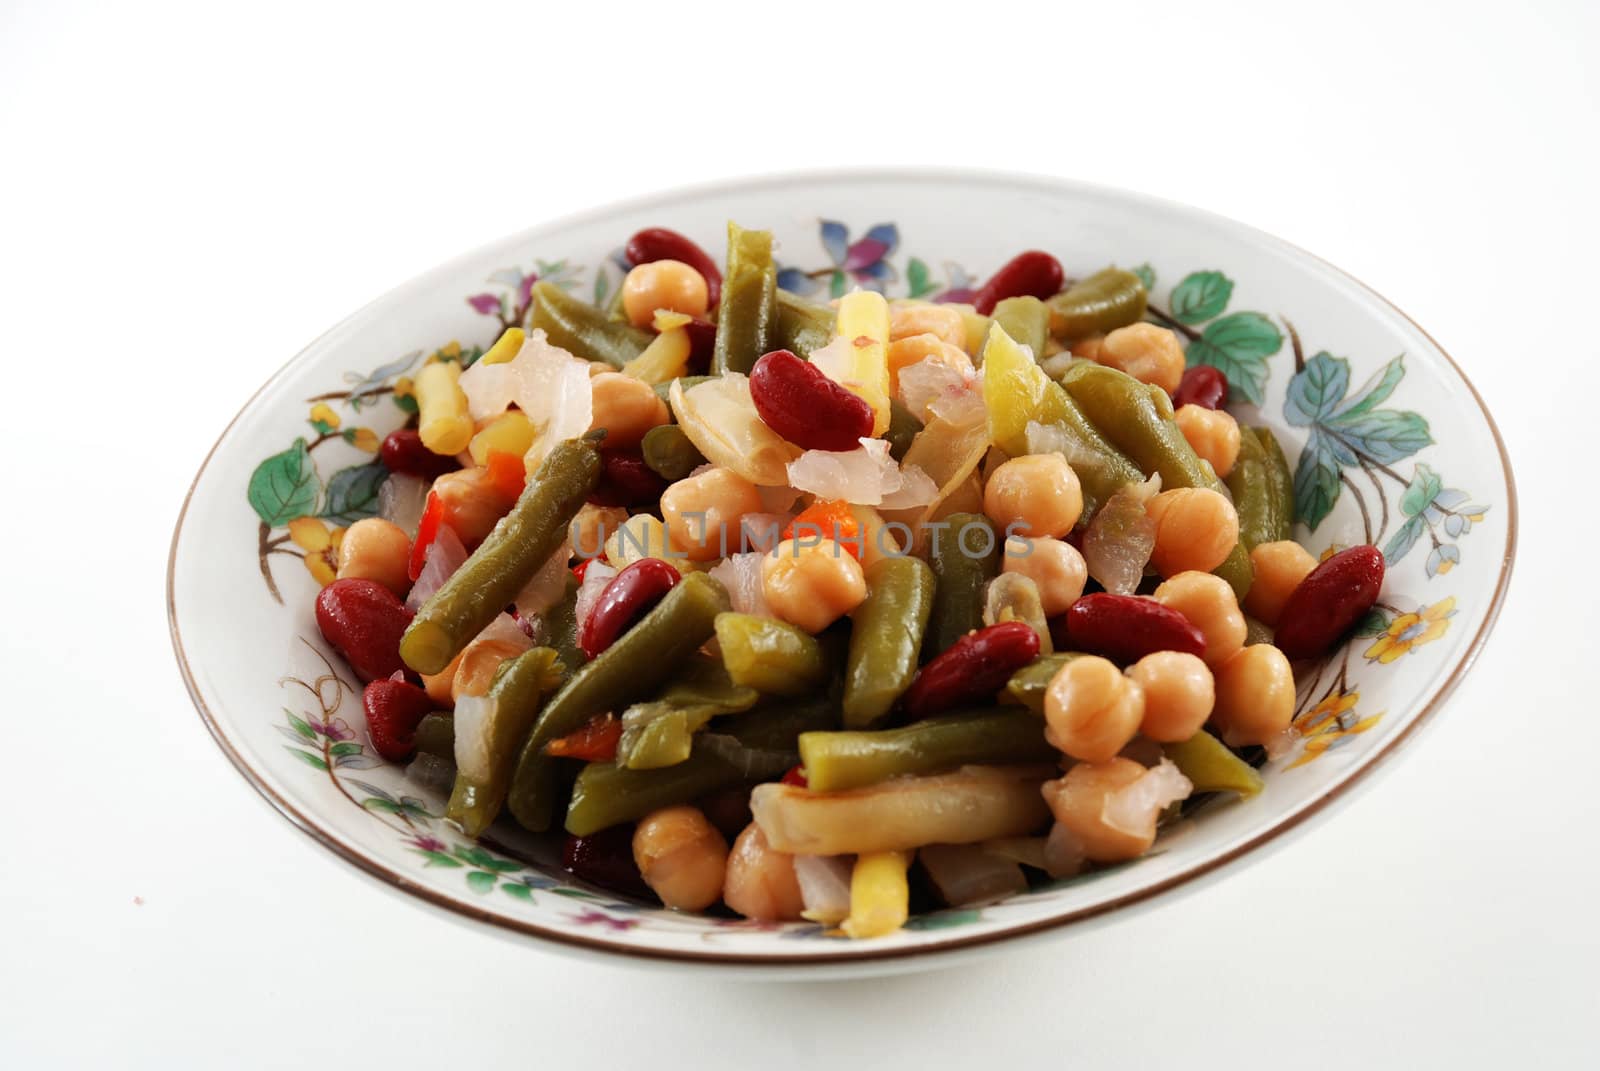 stock picture of a bean and vegetable salad